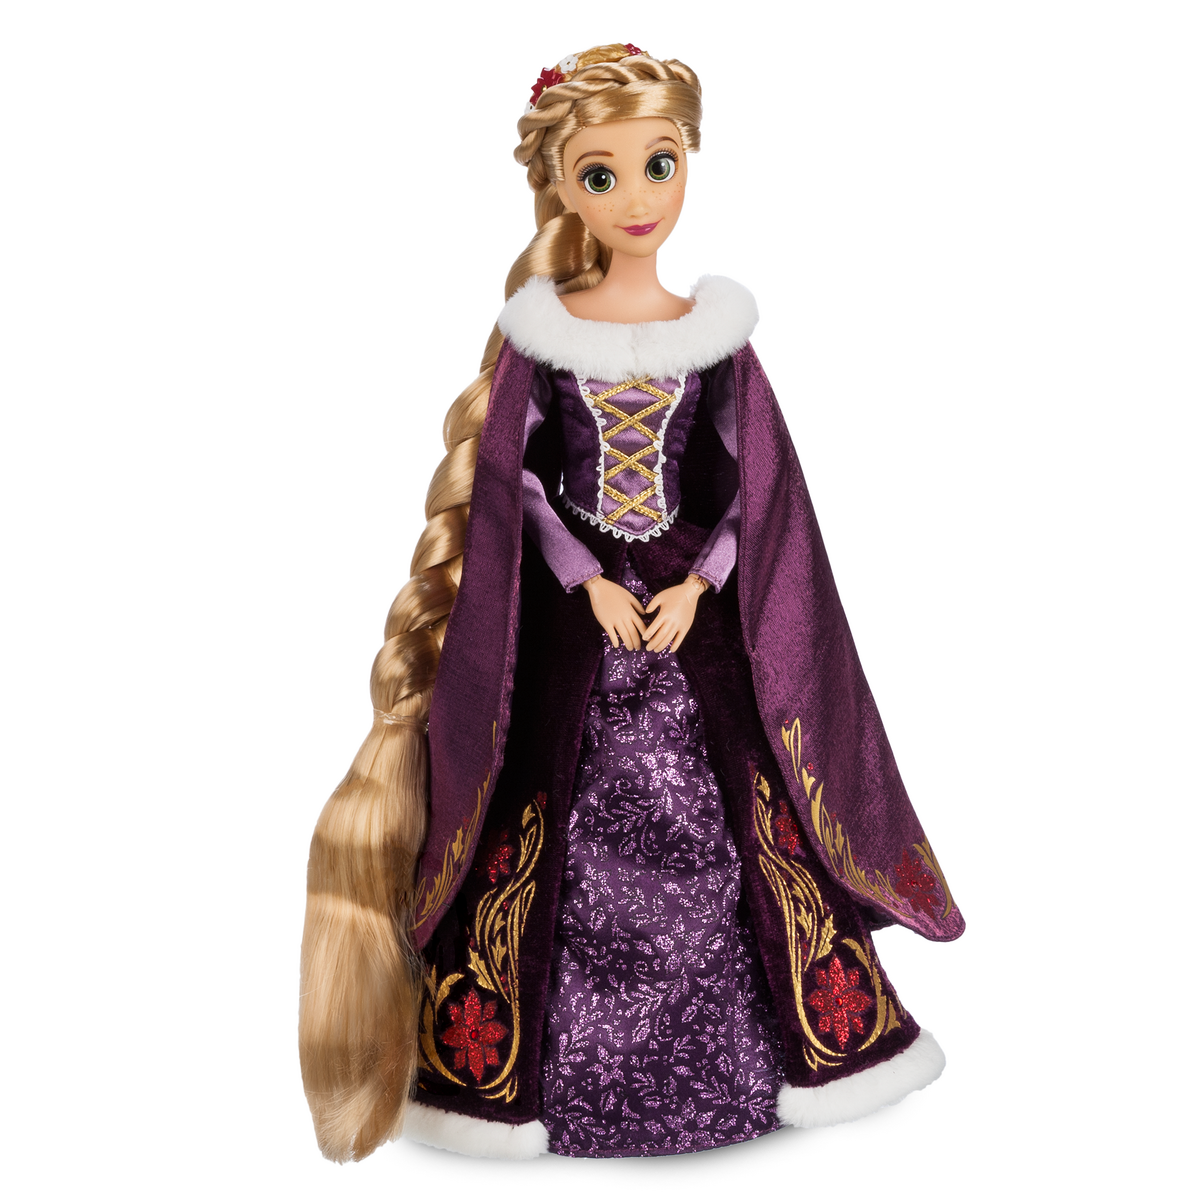 https://static.wikia.nocookie.net/disneydolls/images/e/ef/RapunzelHoliday1.png/revision/latest/scale-to-width-down/1200?cb=20211111034841